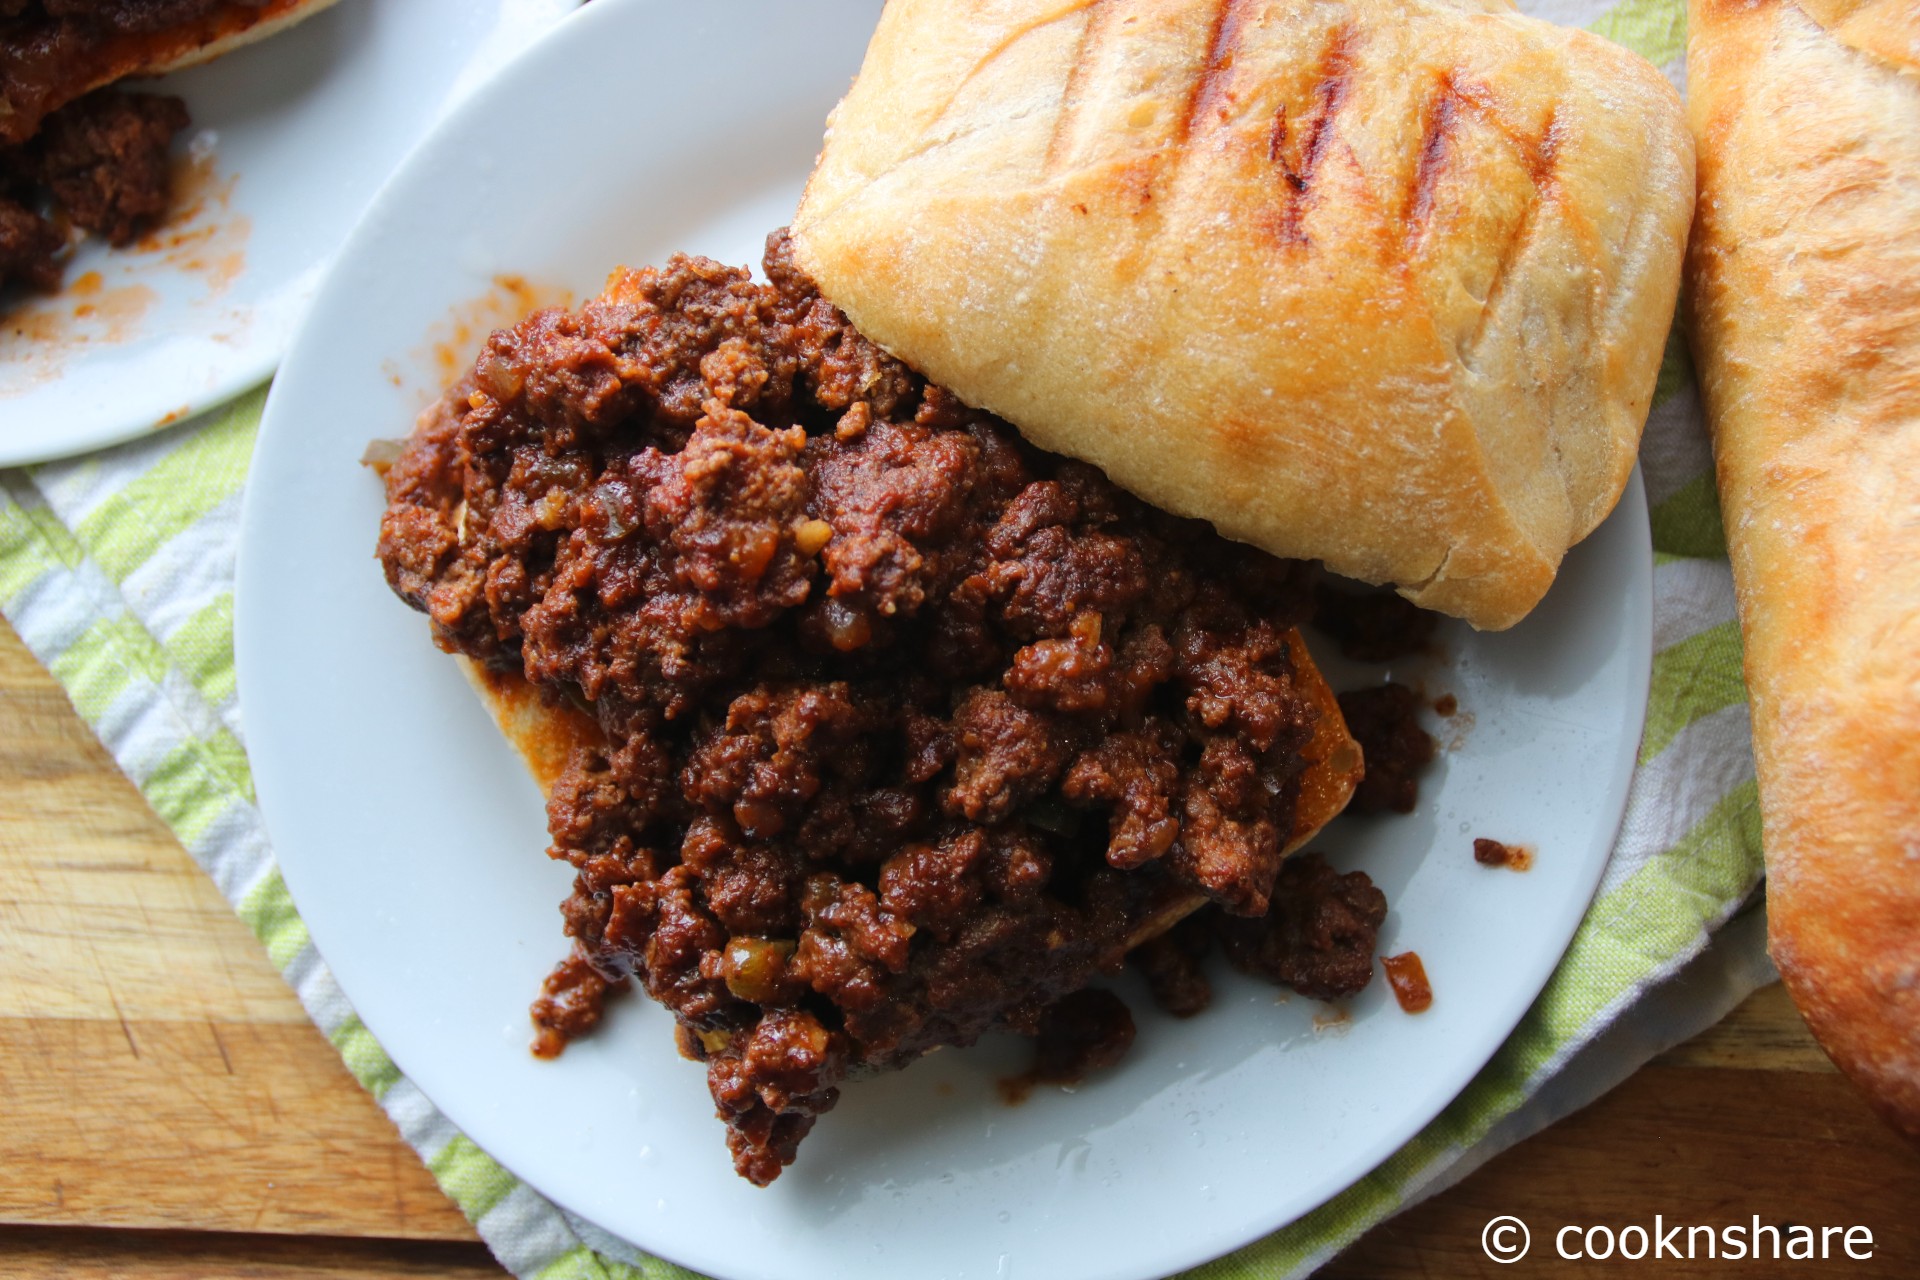 Weber® Gourmet Burger Sloppy Joes - The Real Kitchen